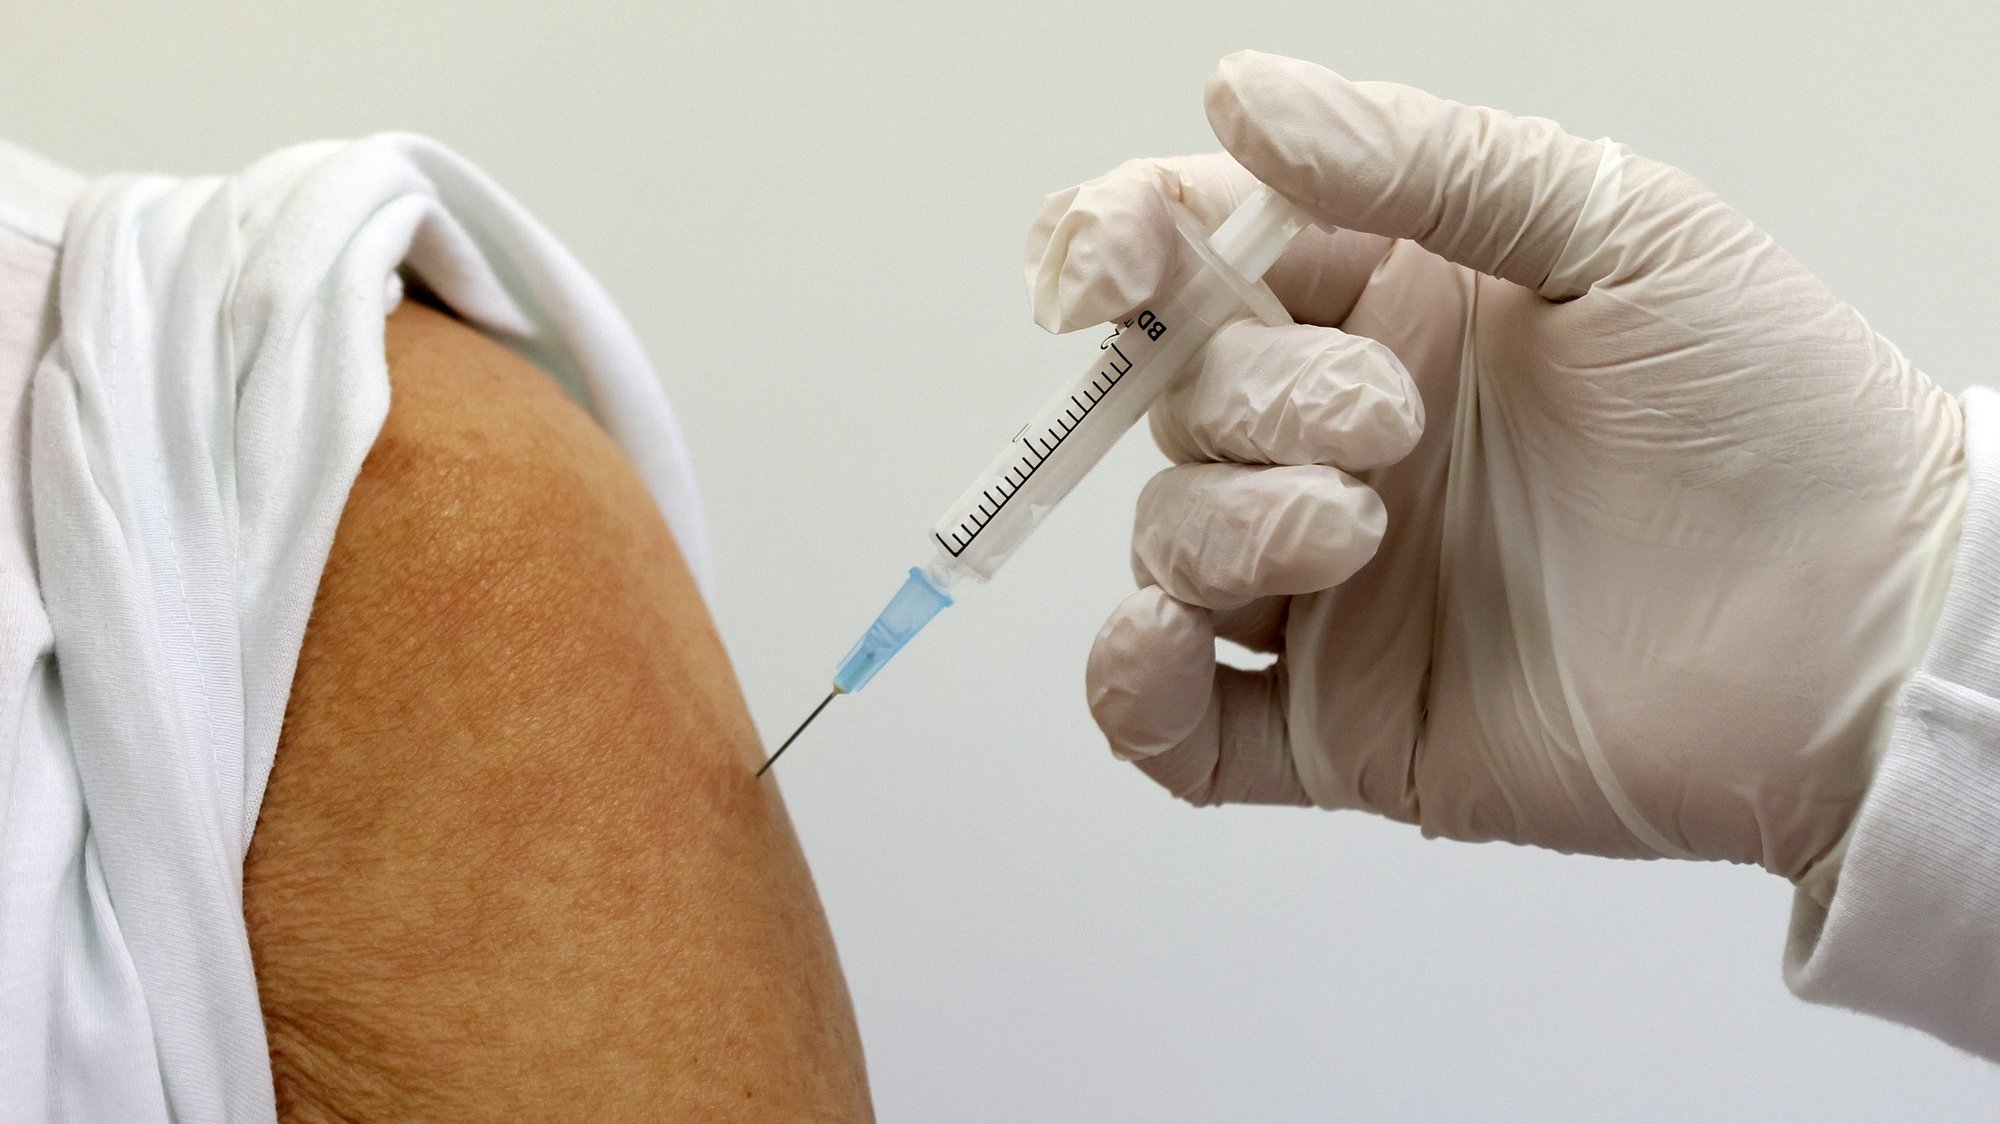 epa08924670 A patient receives a vaccination against the coronavirus Sars-CoV-2 by a medical assistant at the vaccination center in Mainz, Germany, Germany, 07 January 2021. Vaccinations against the coronavirus started at centers in Rhineland Palatinate state, to curb the COVID- 19 pandemic.  EPA/RONALD WITTEK